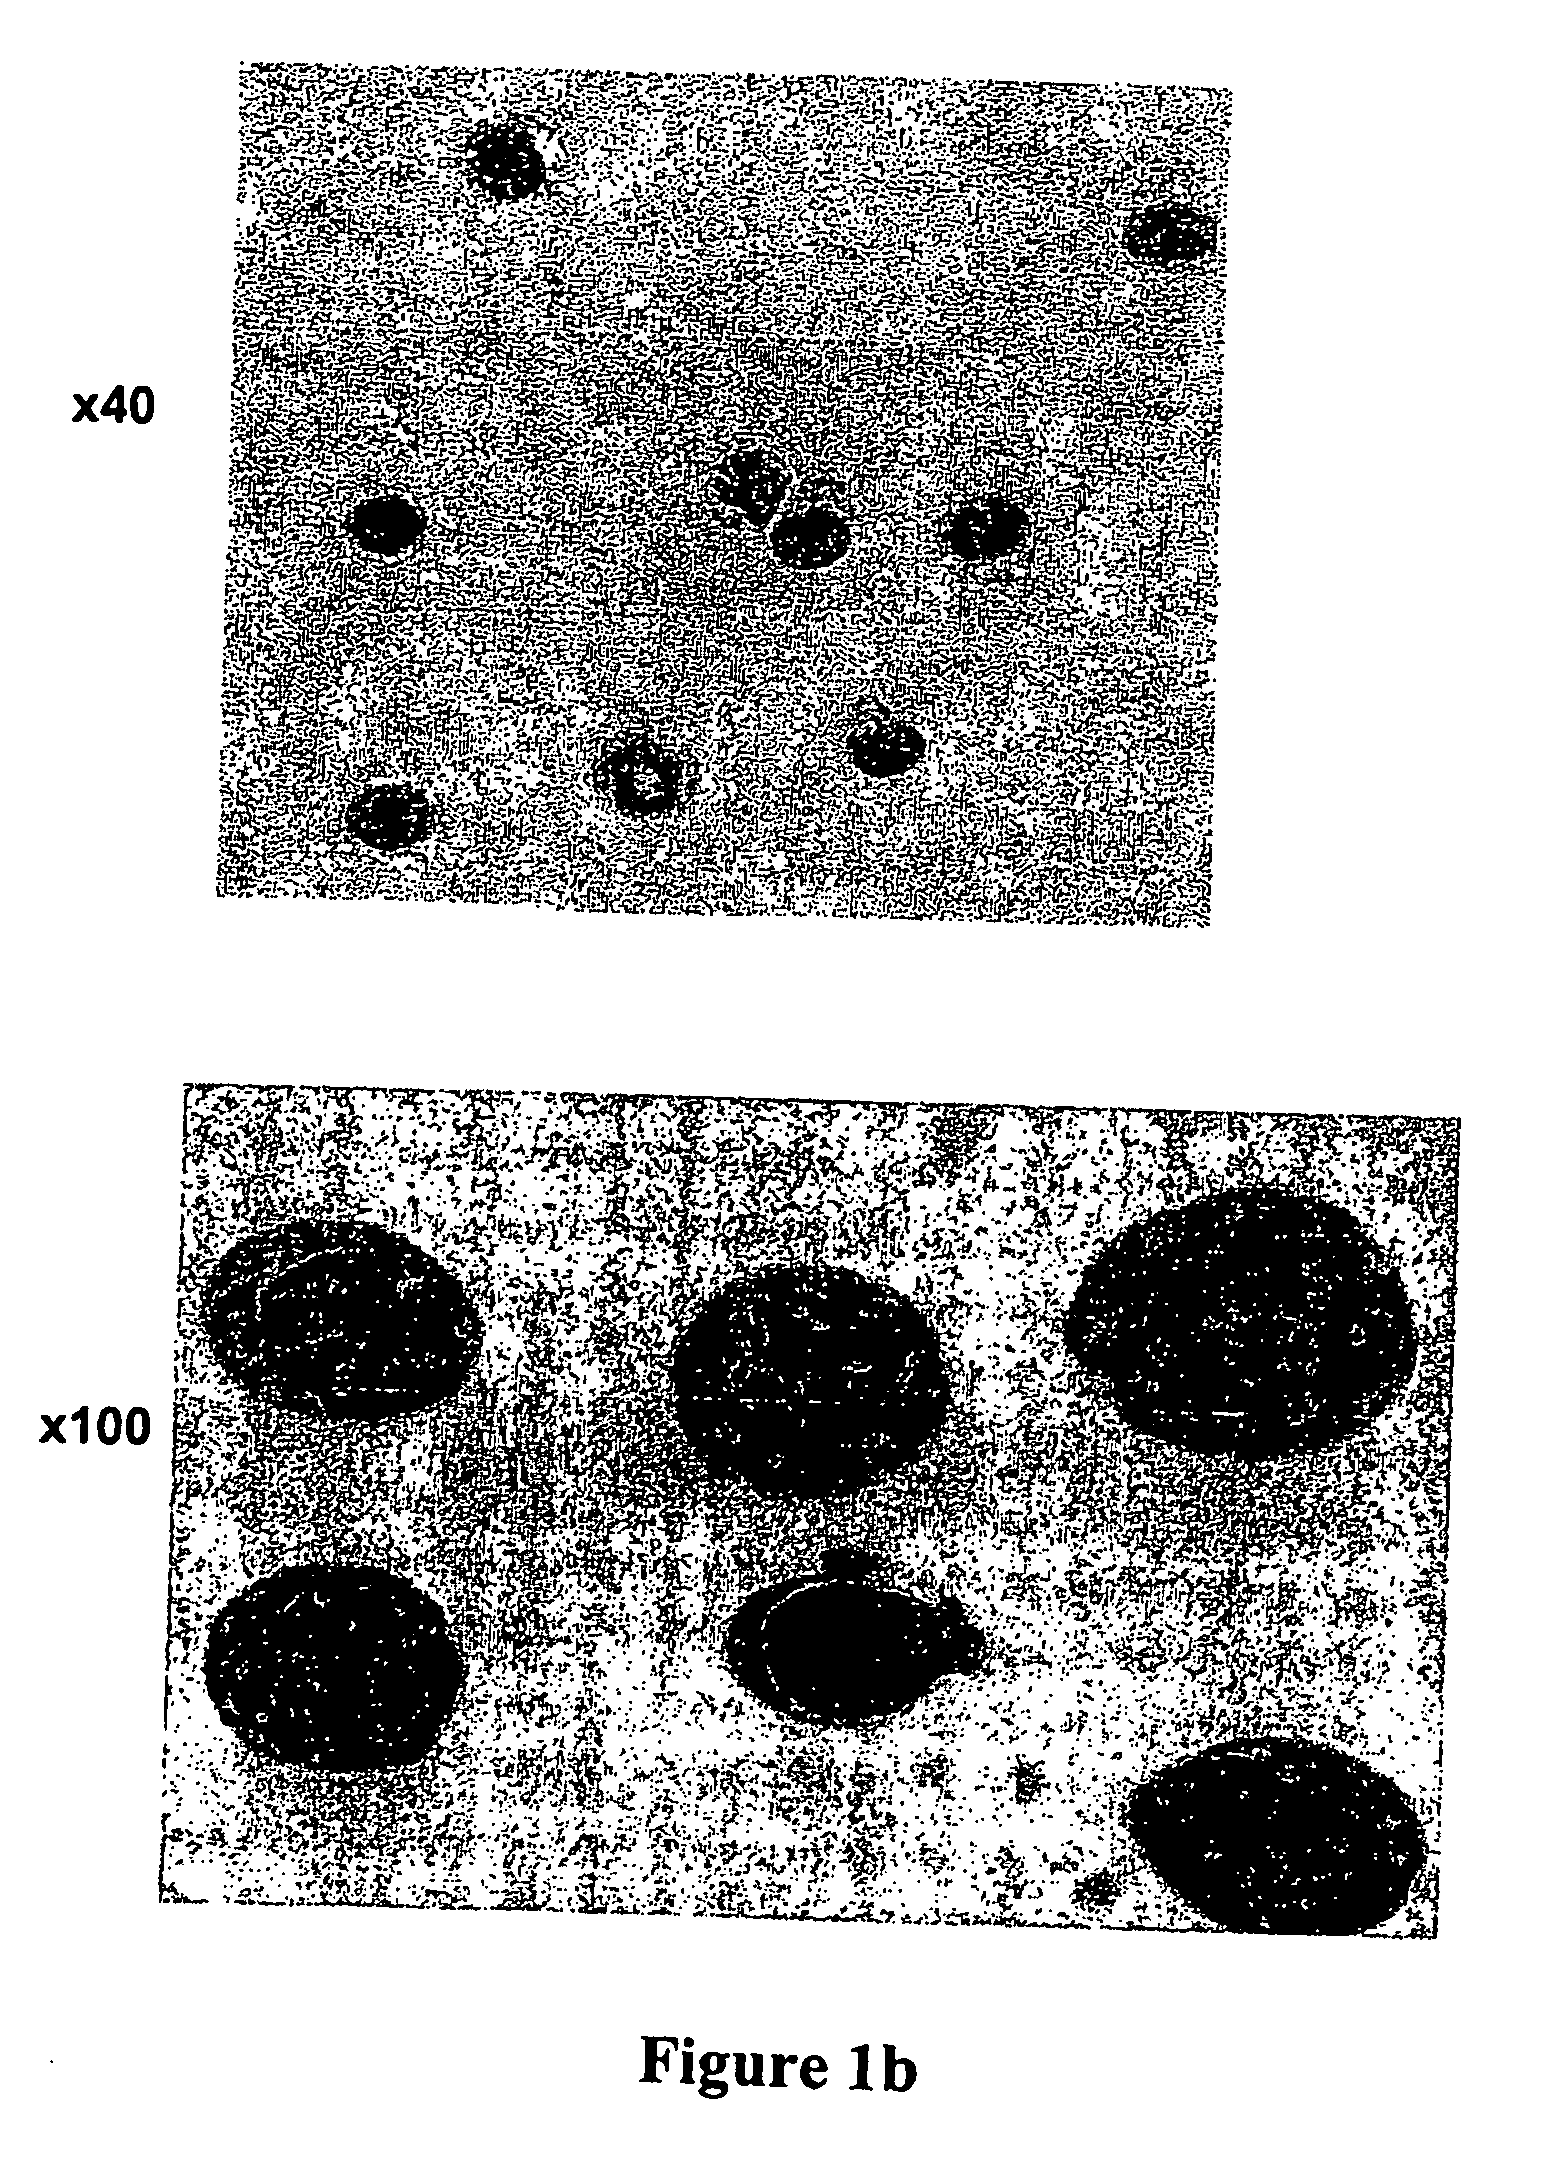 Methods for enhancing engraftment of purified hematopoietic stem cells in allogenic recipients